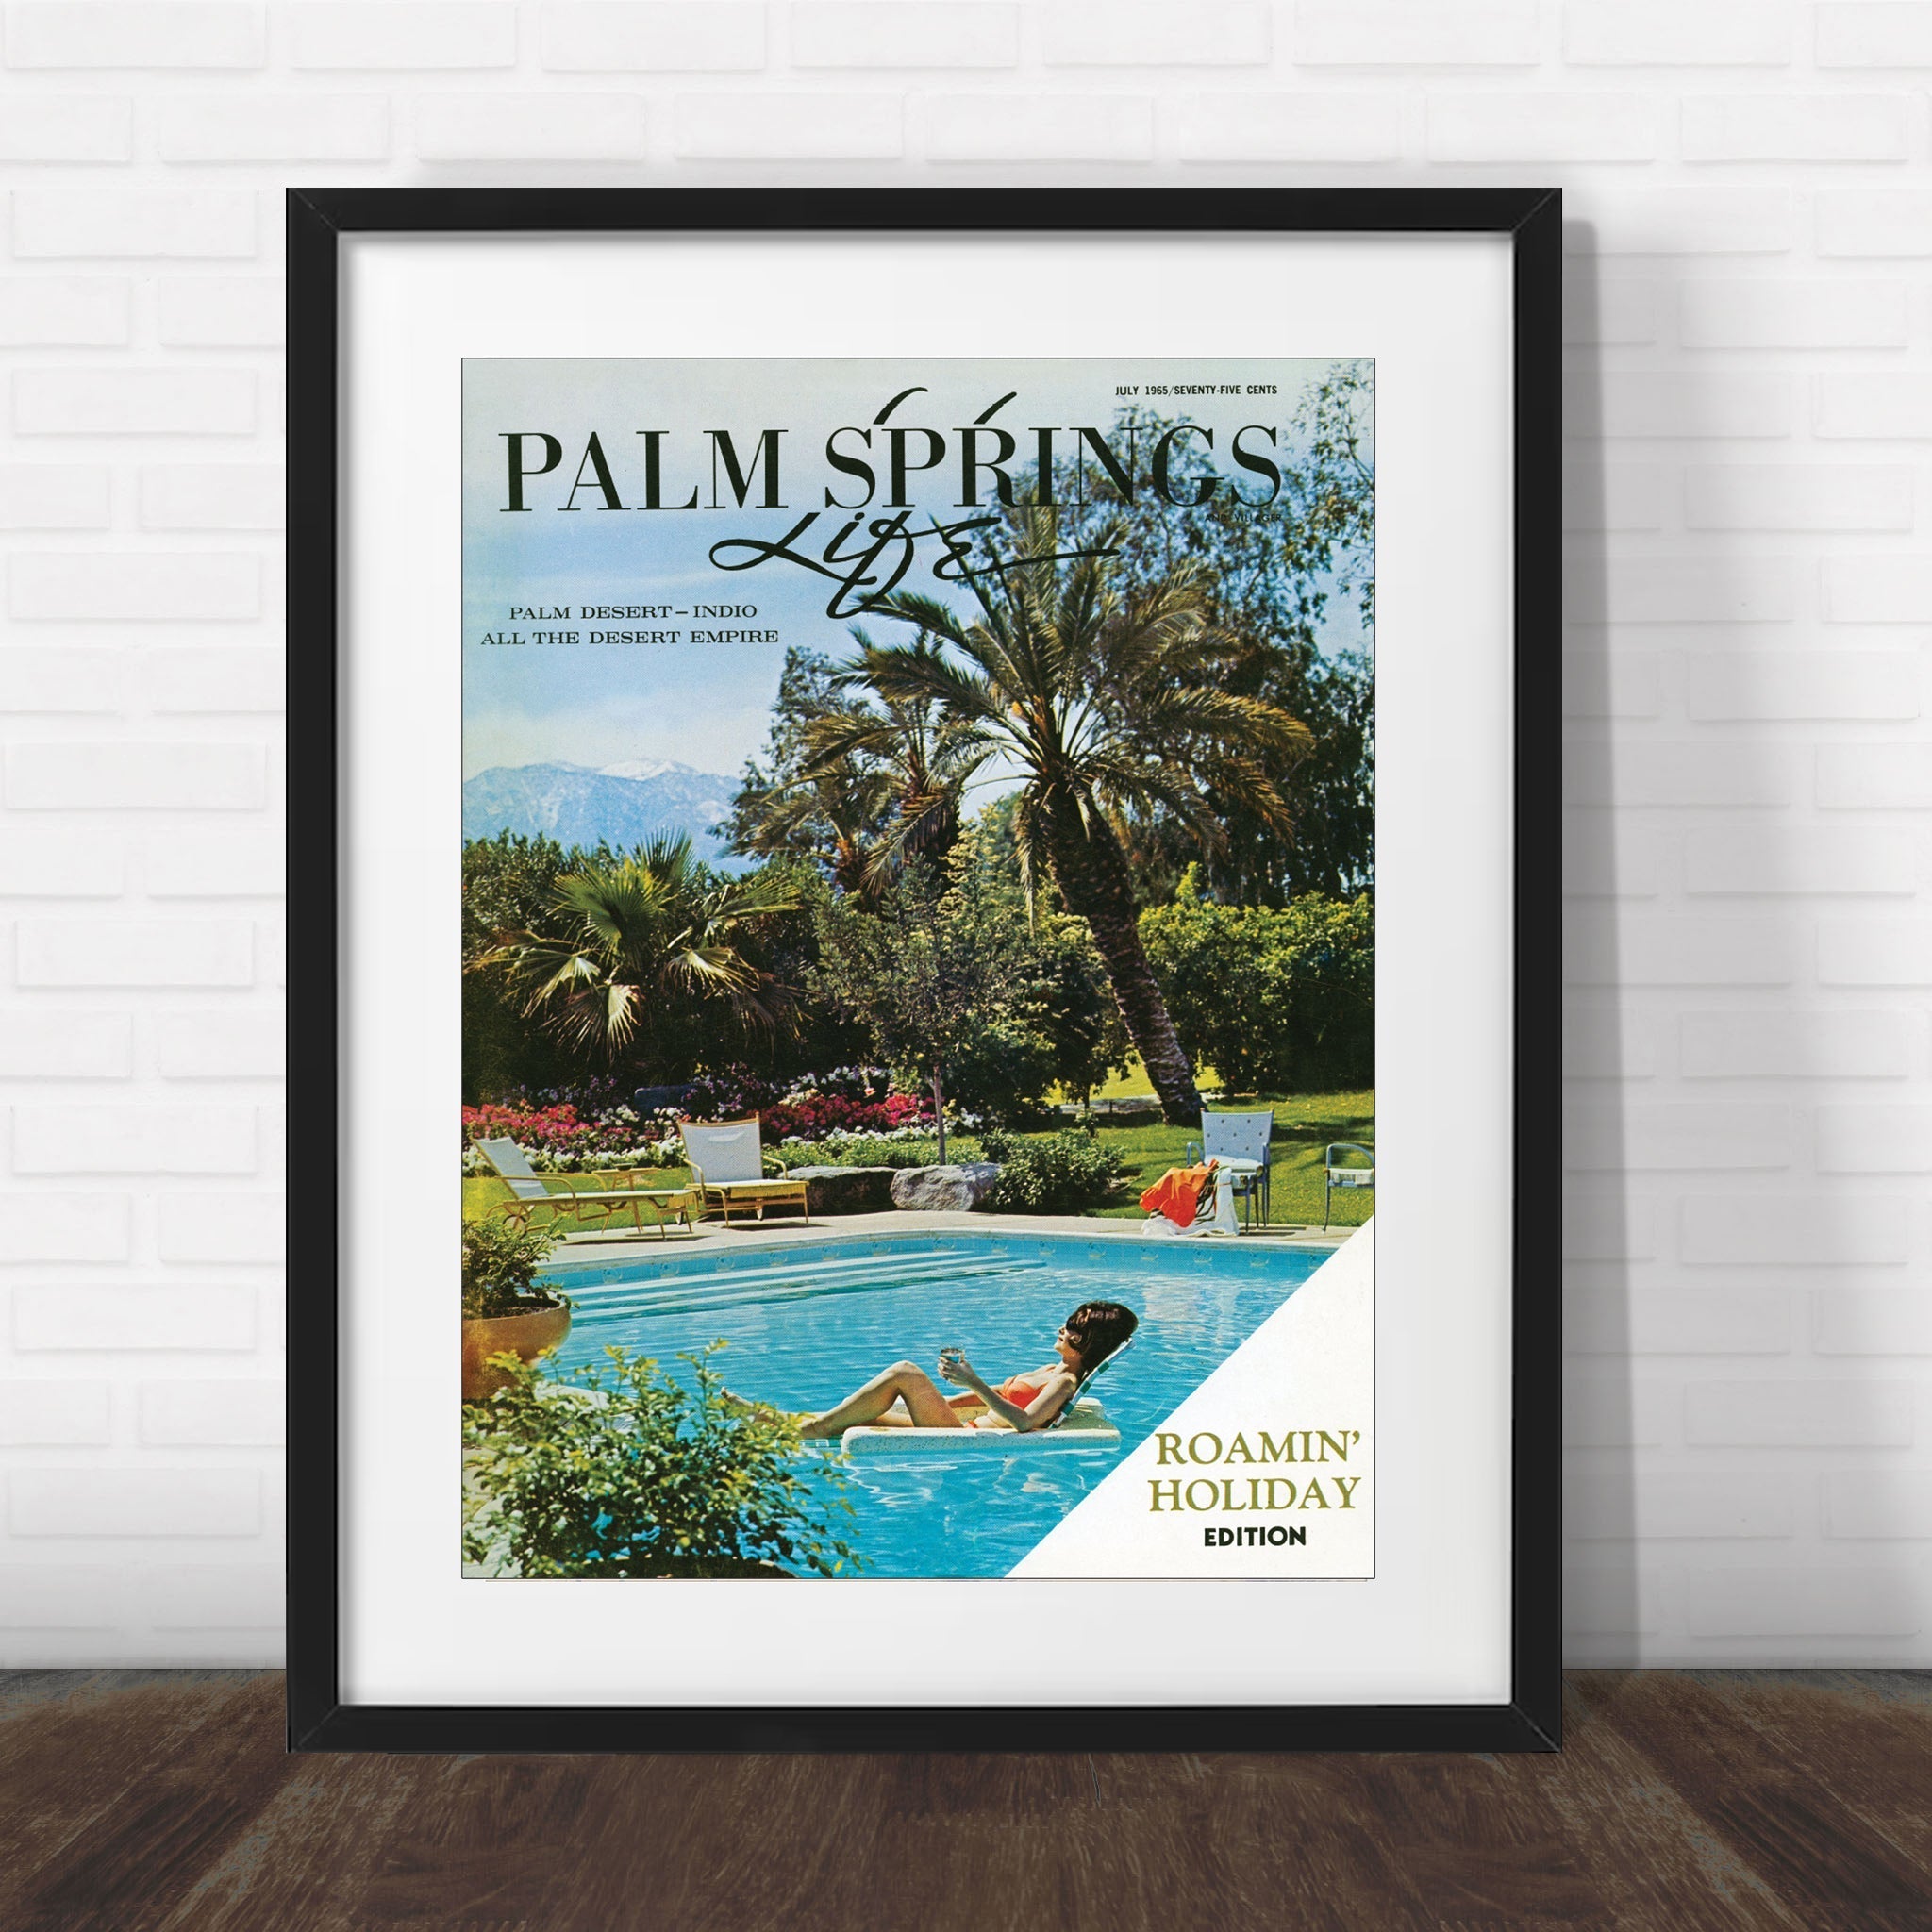 Palm Springs Life - July 1965 - Cover Poster